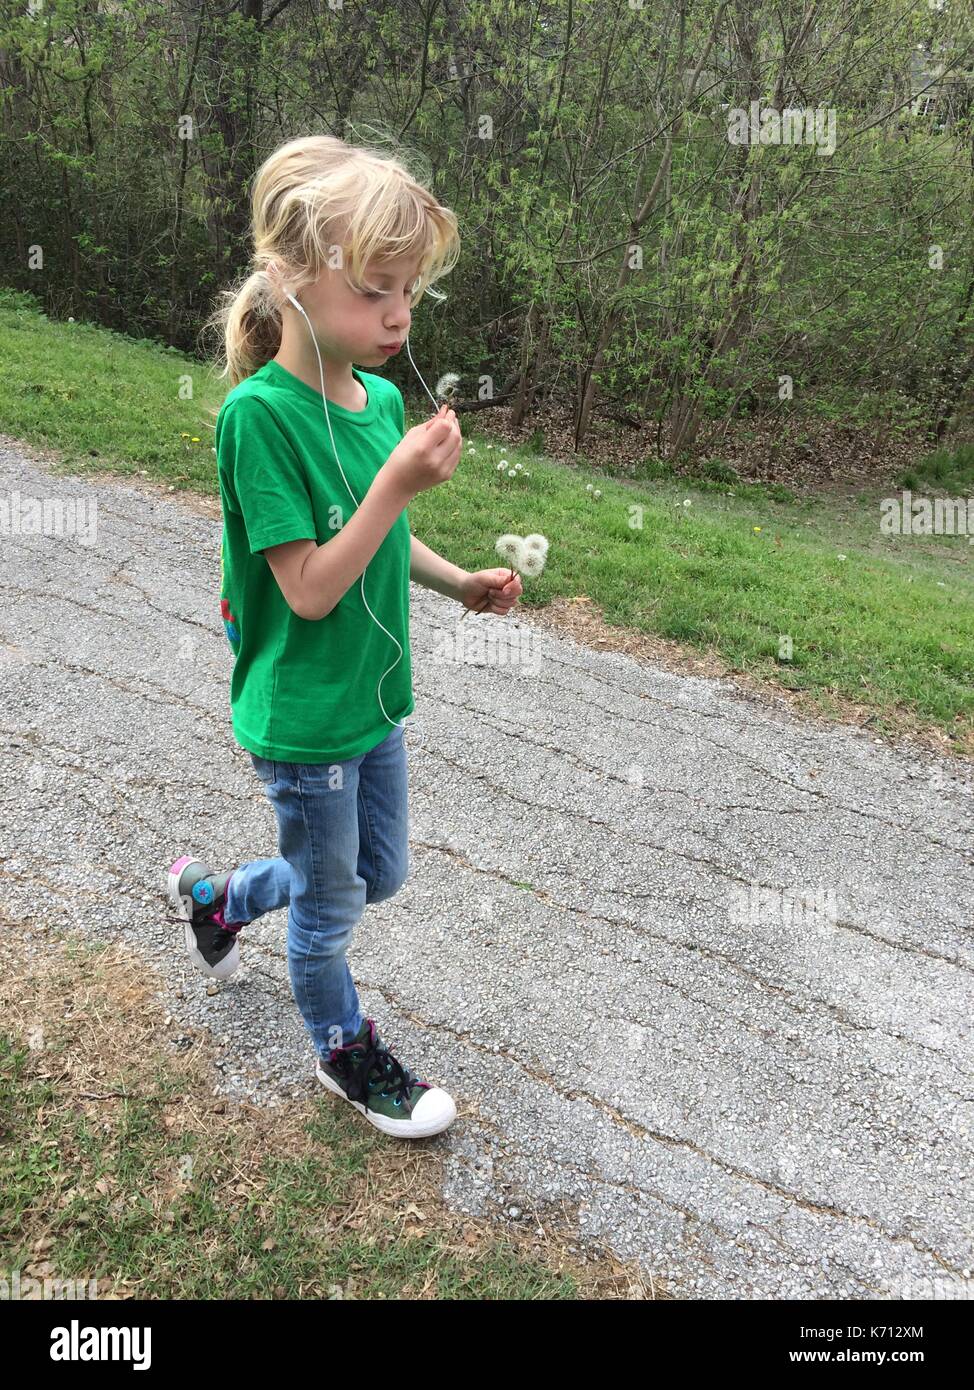 Little girl blowing dandelion while on a walk and listening to music Stock Photo